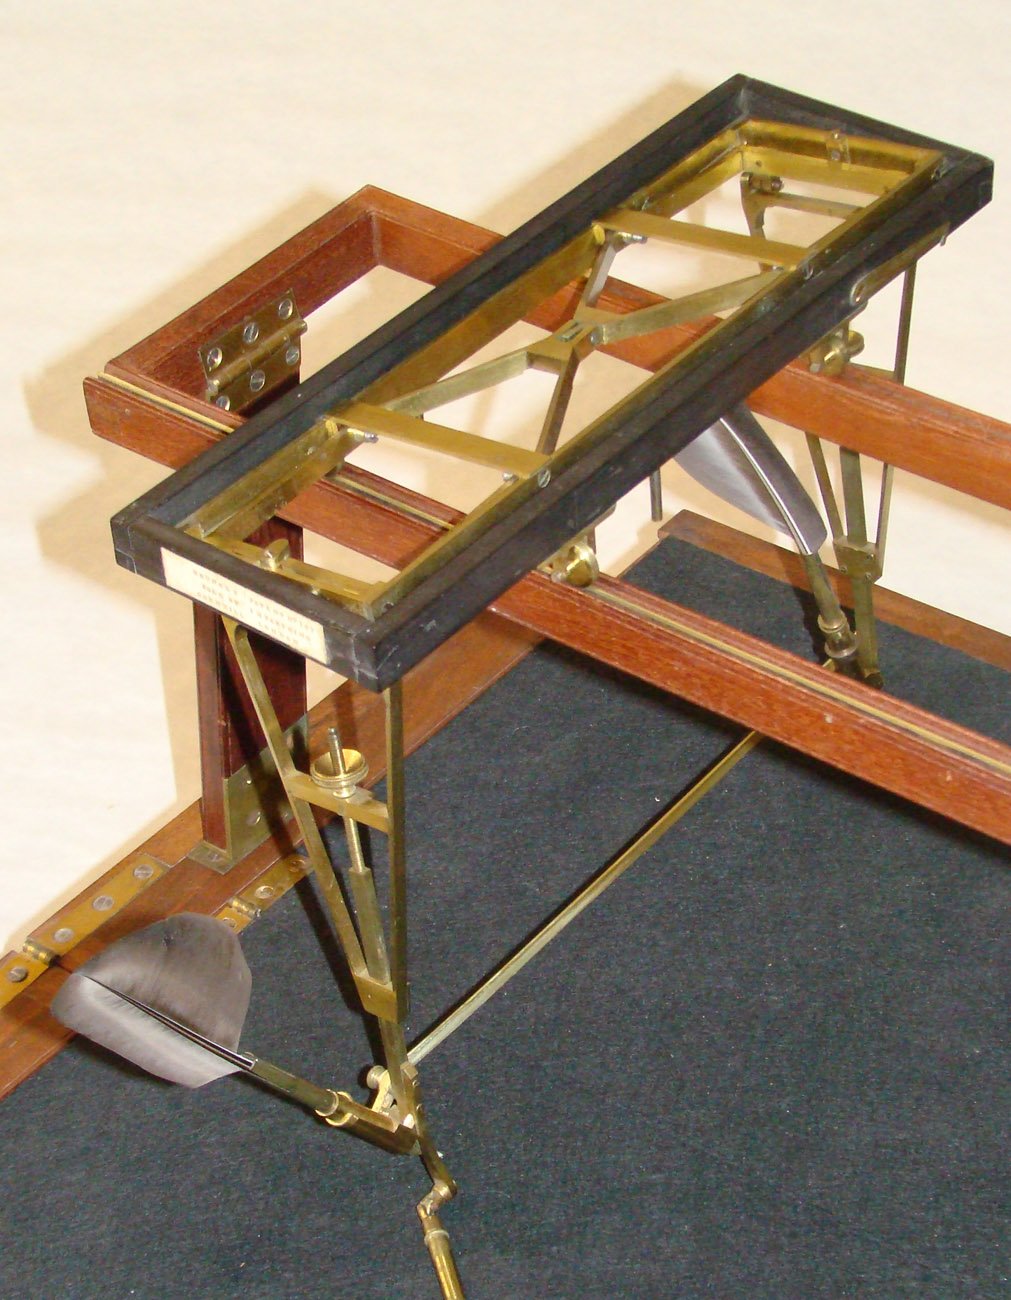 Image courtesy Tesseract -- Early Scientific Instruments Click for next image